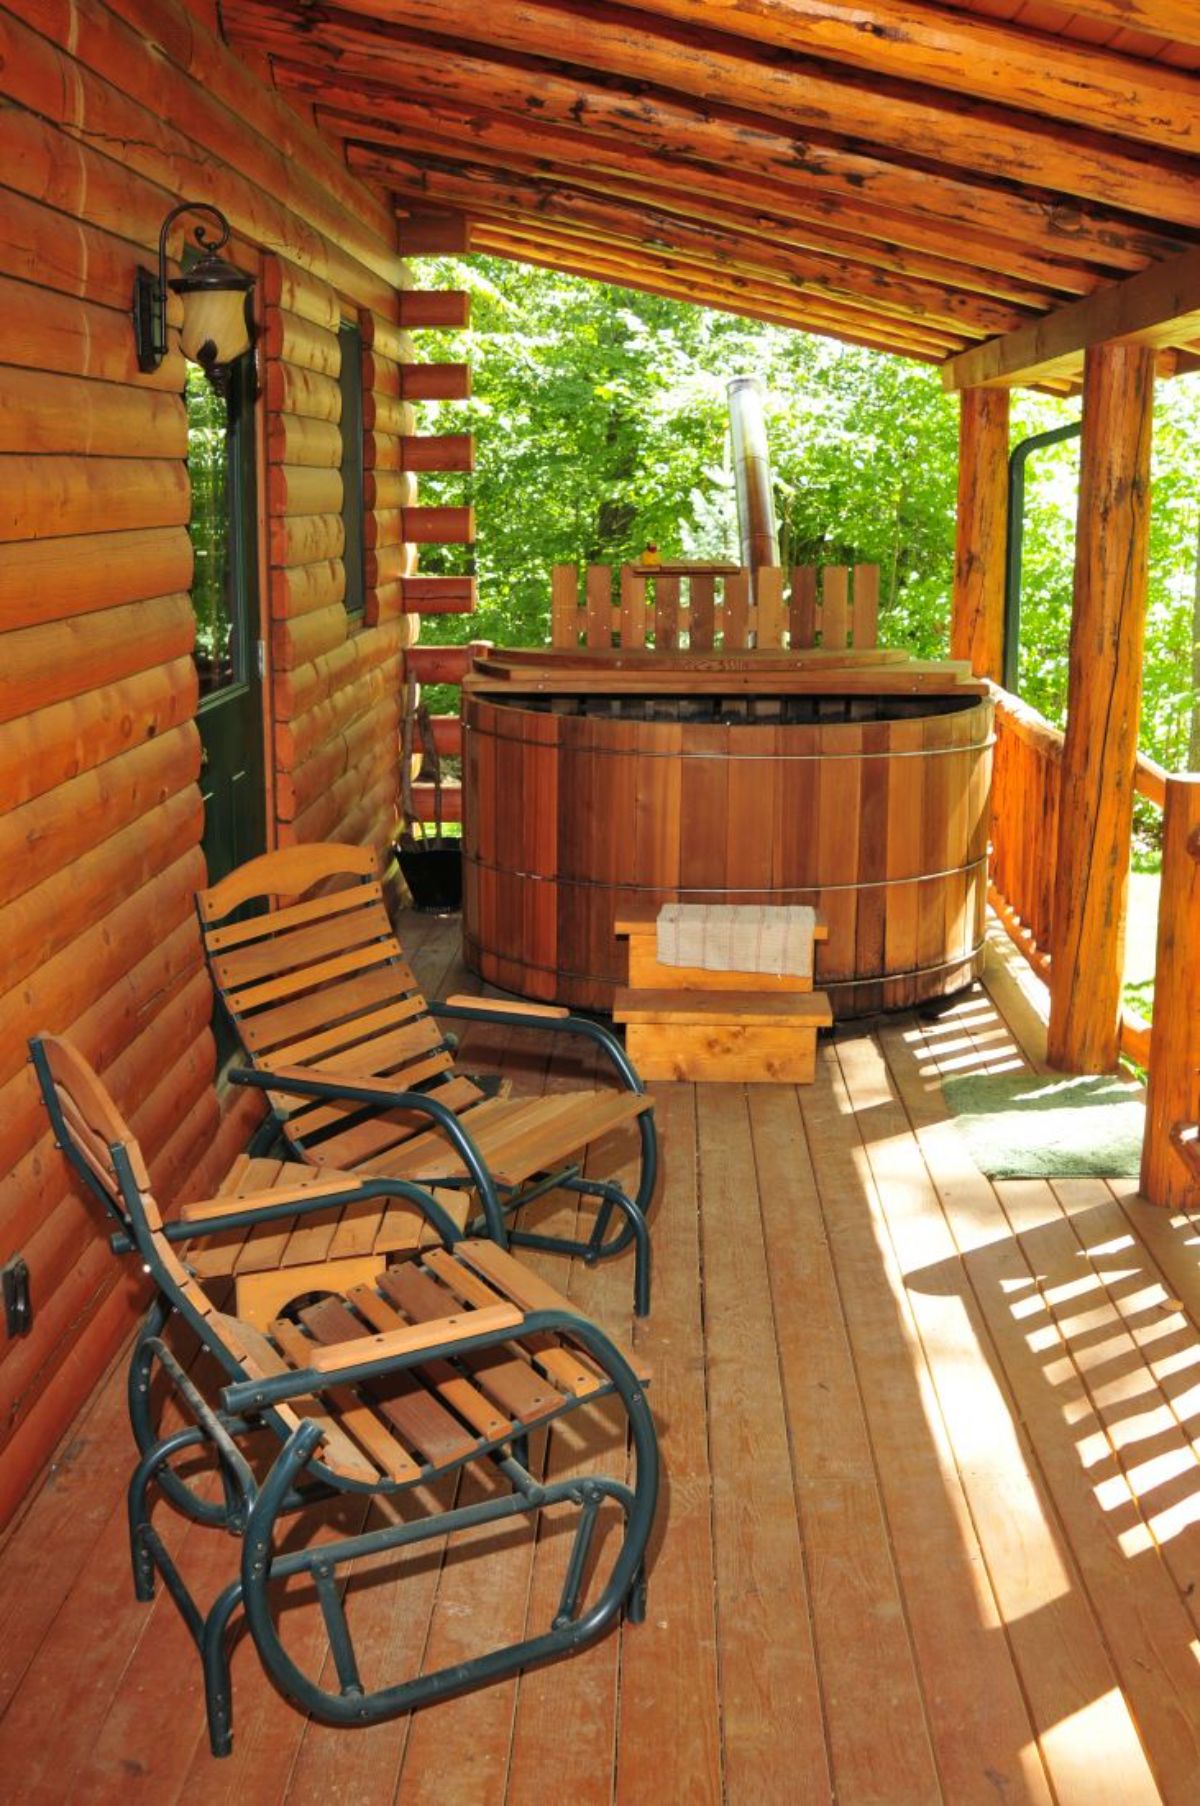 wood lined hot tub on end of covered porch of log cabin